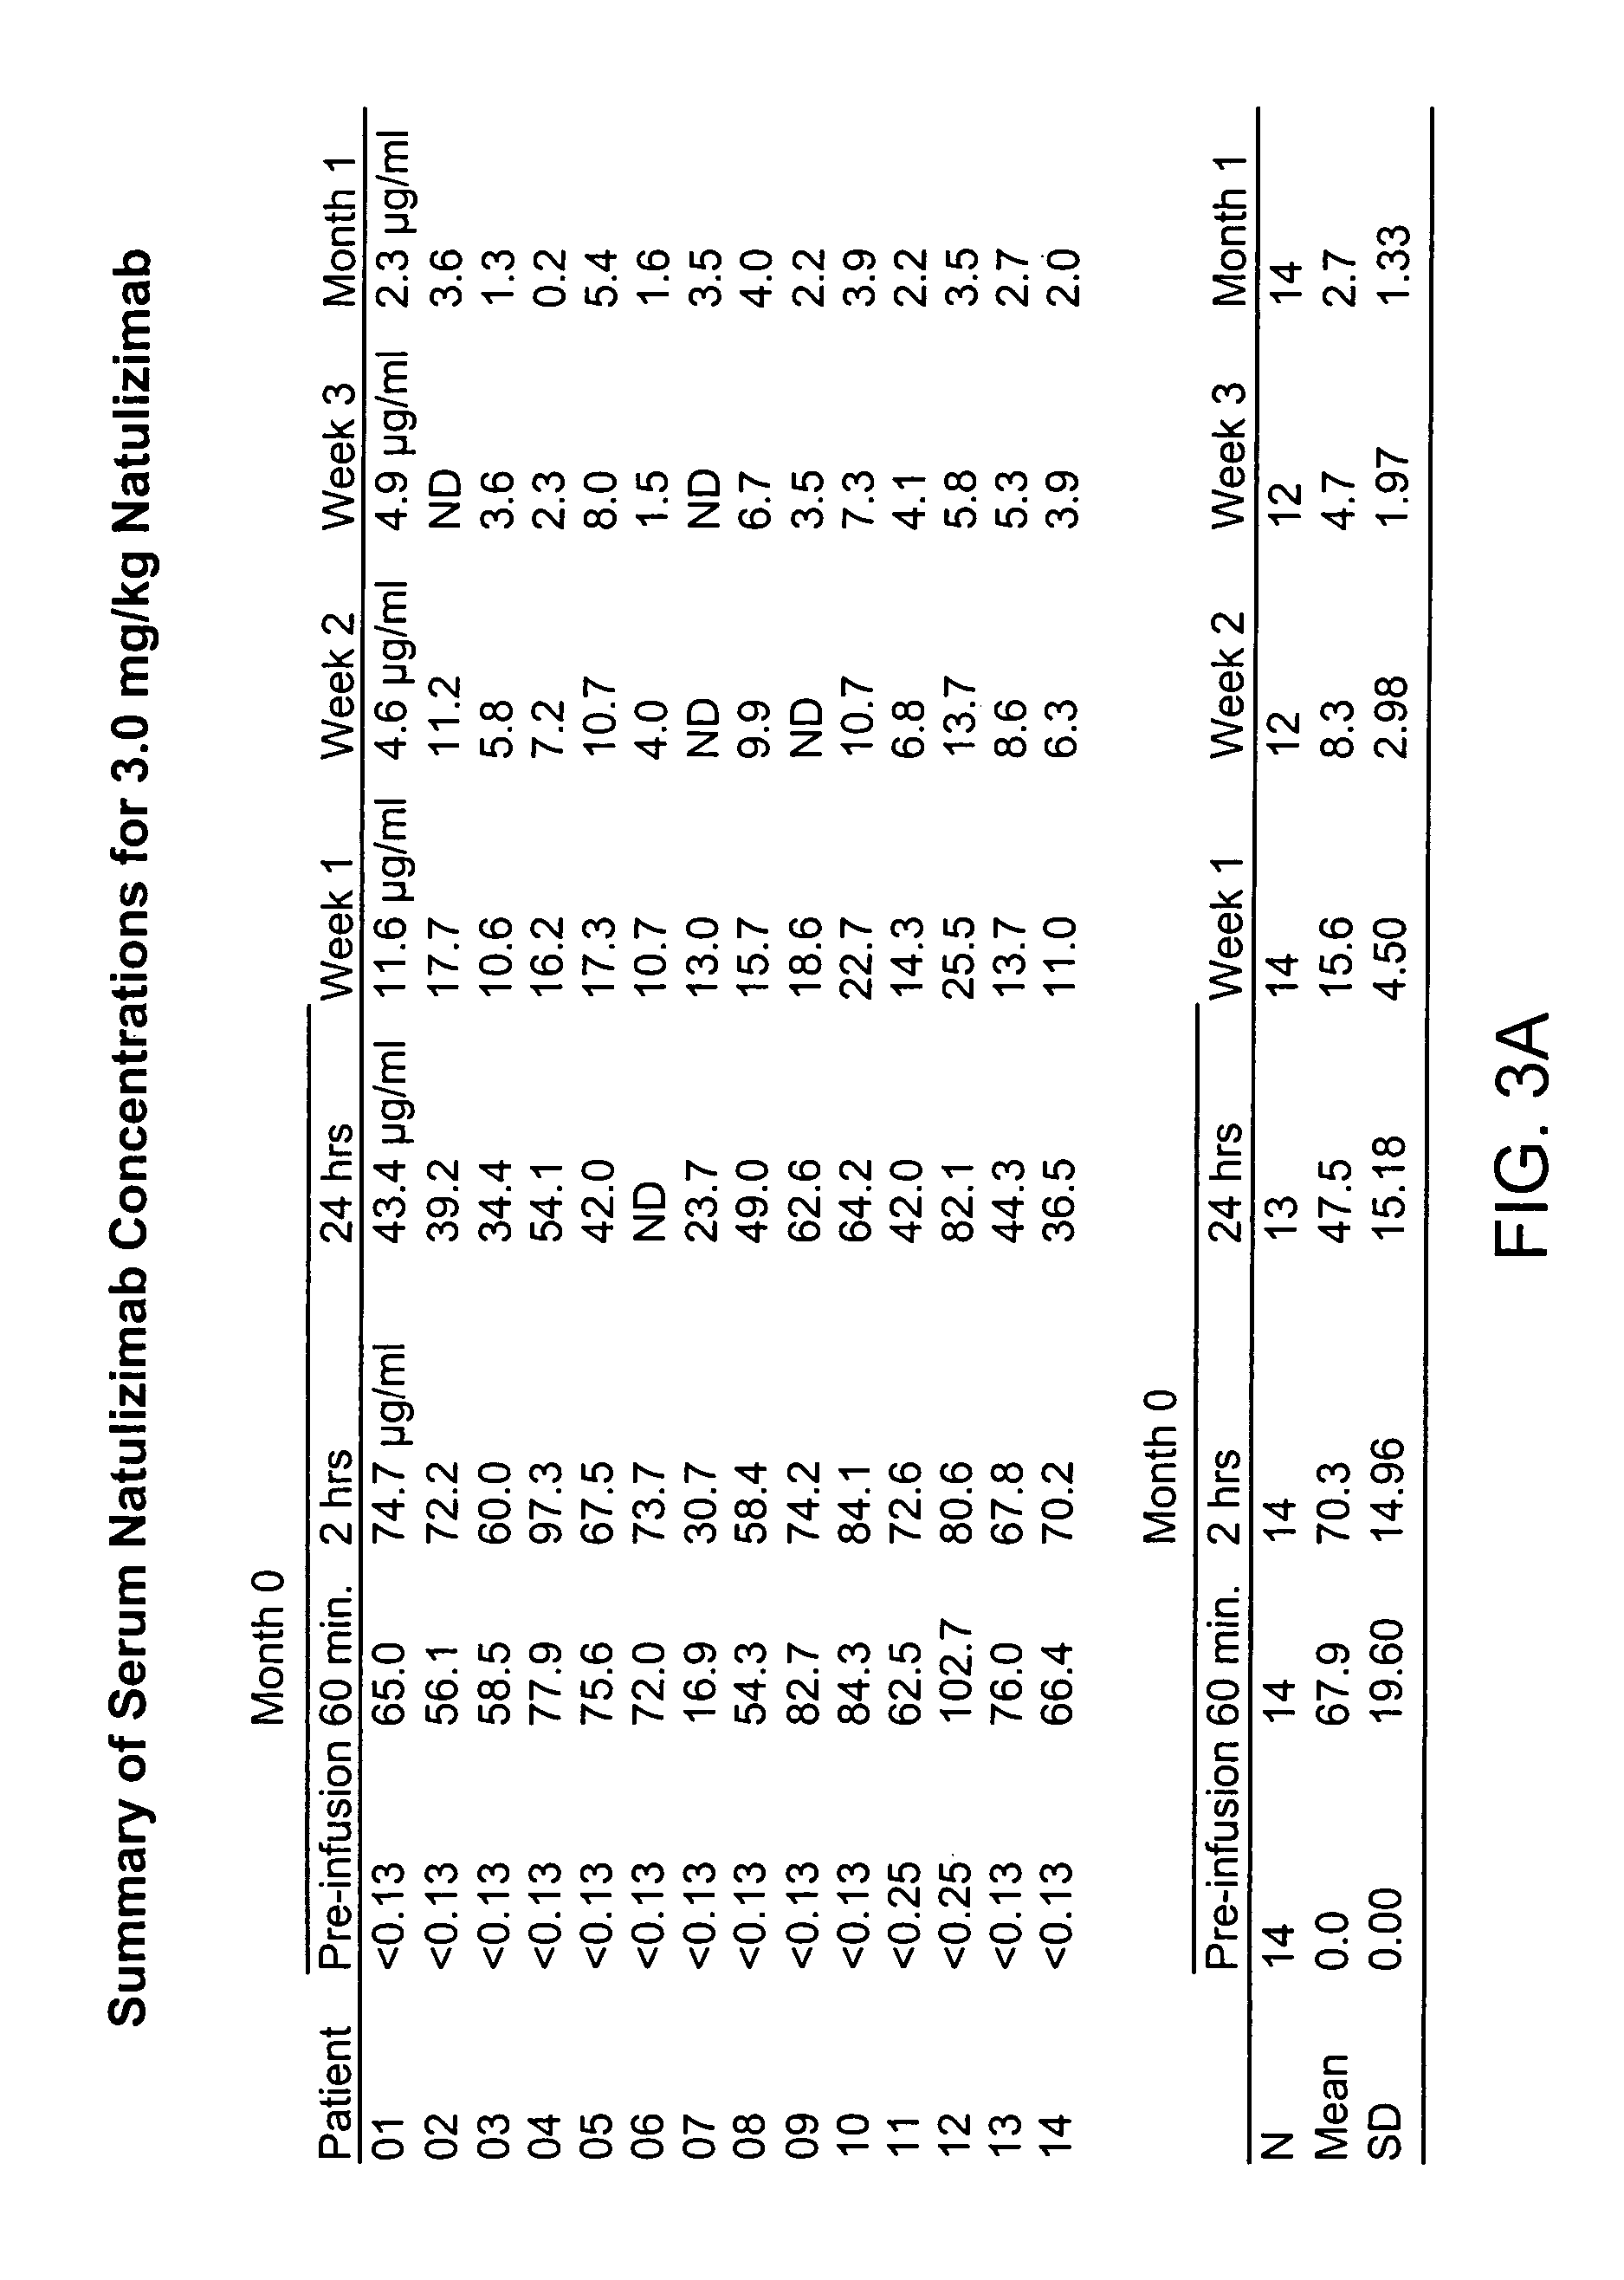 Administration of agents for the treatment of inflammation